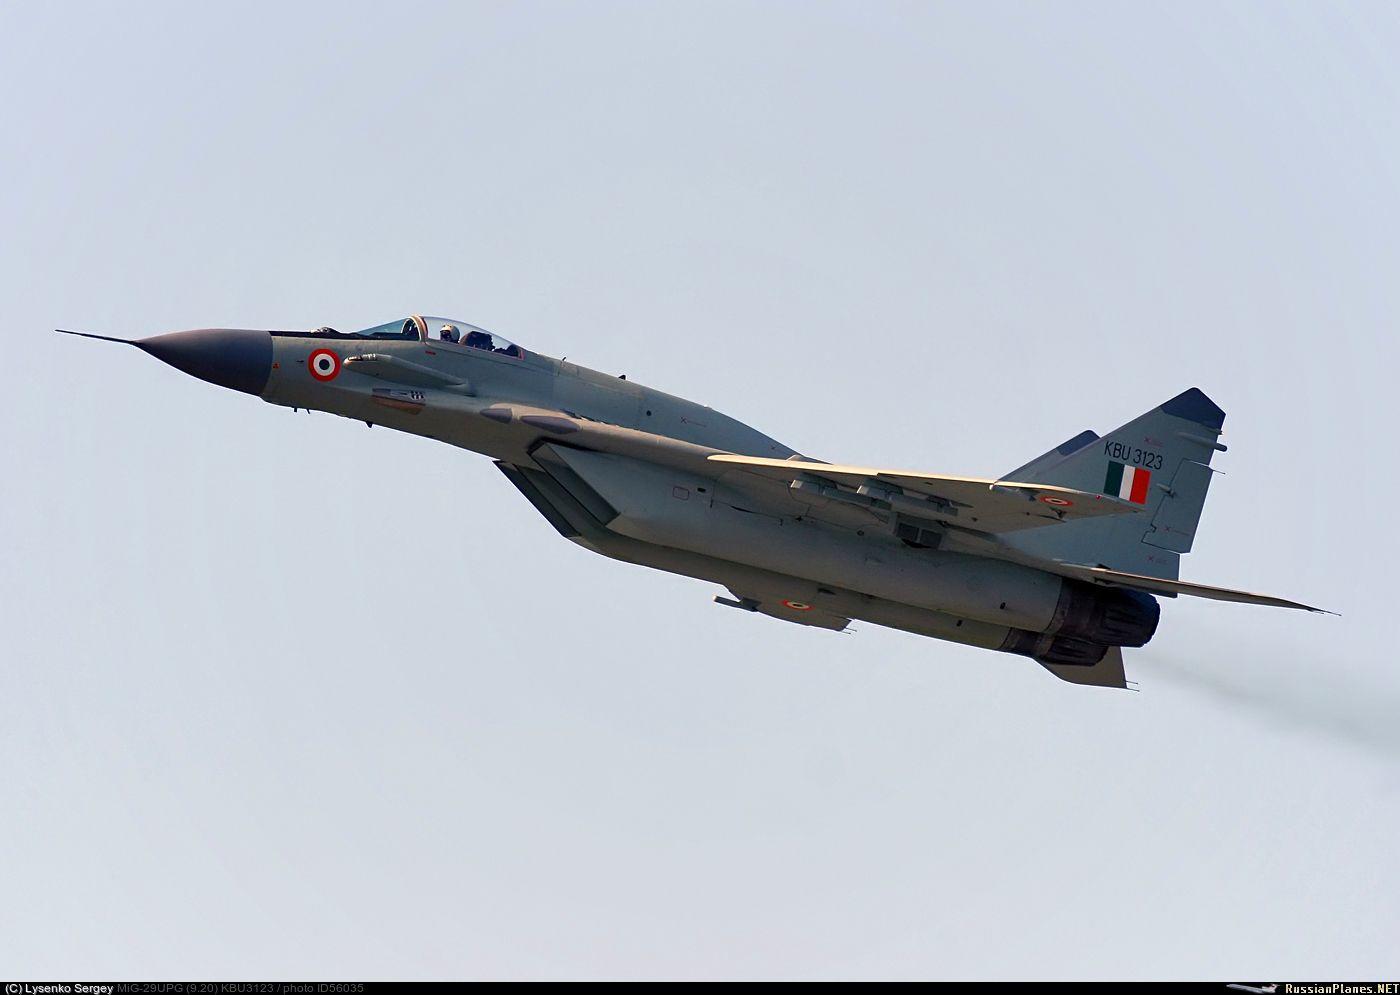 Indian Air Forces MiG-29 fighter aircraft crashes in Punjab